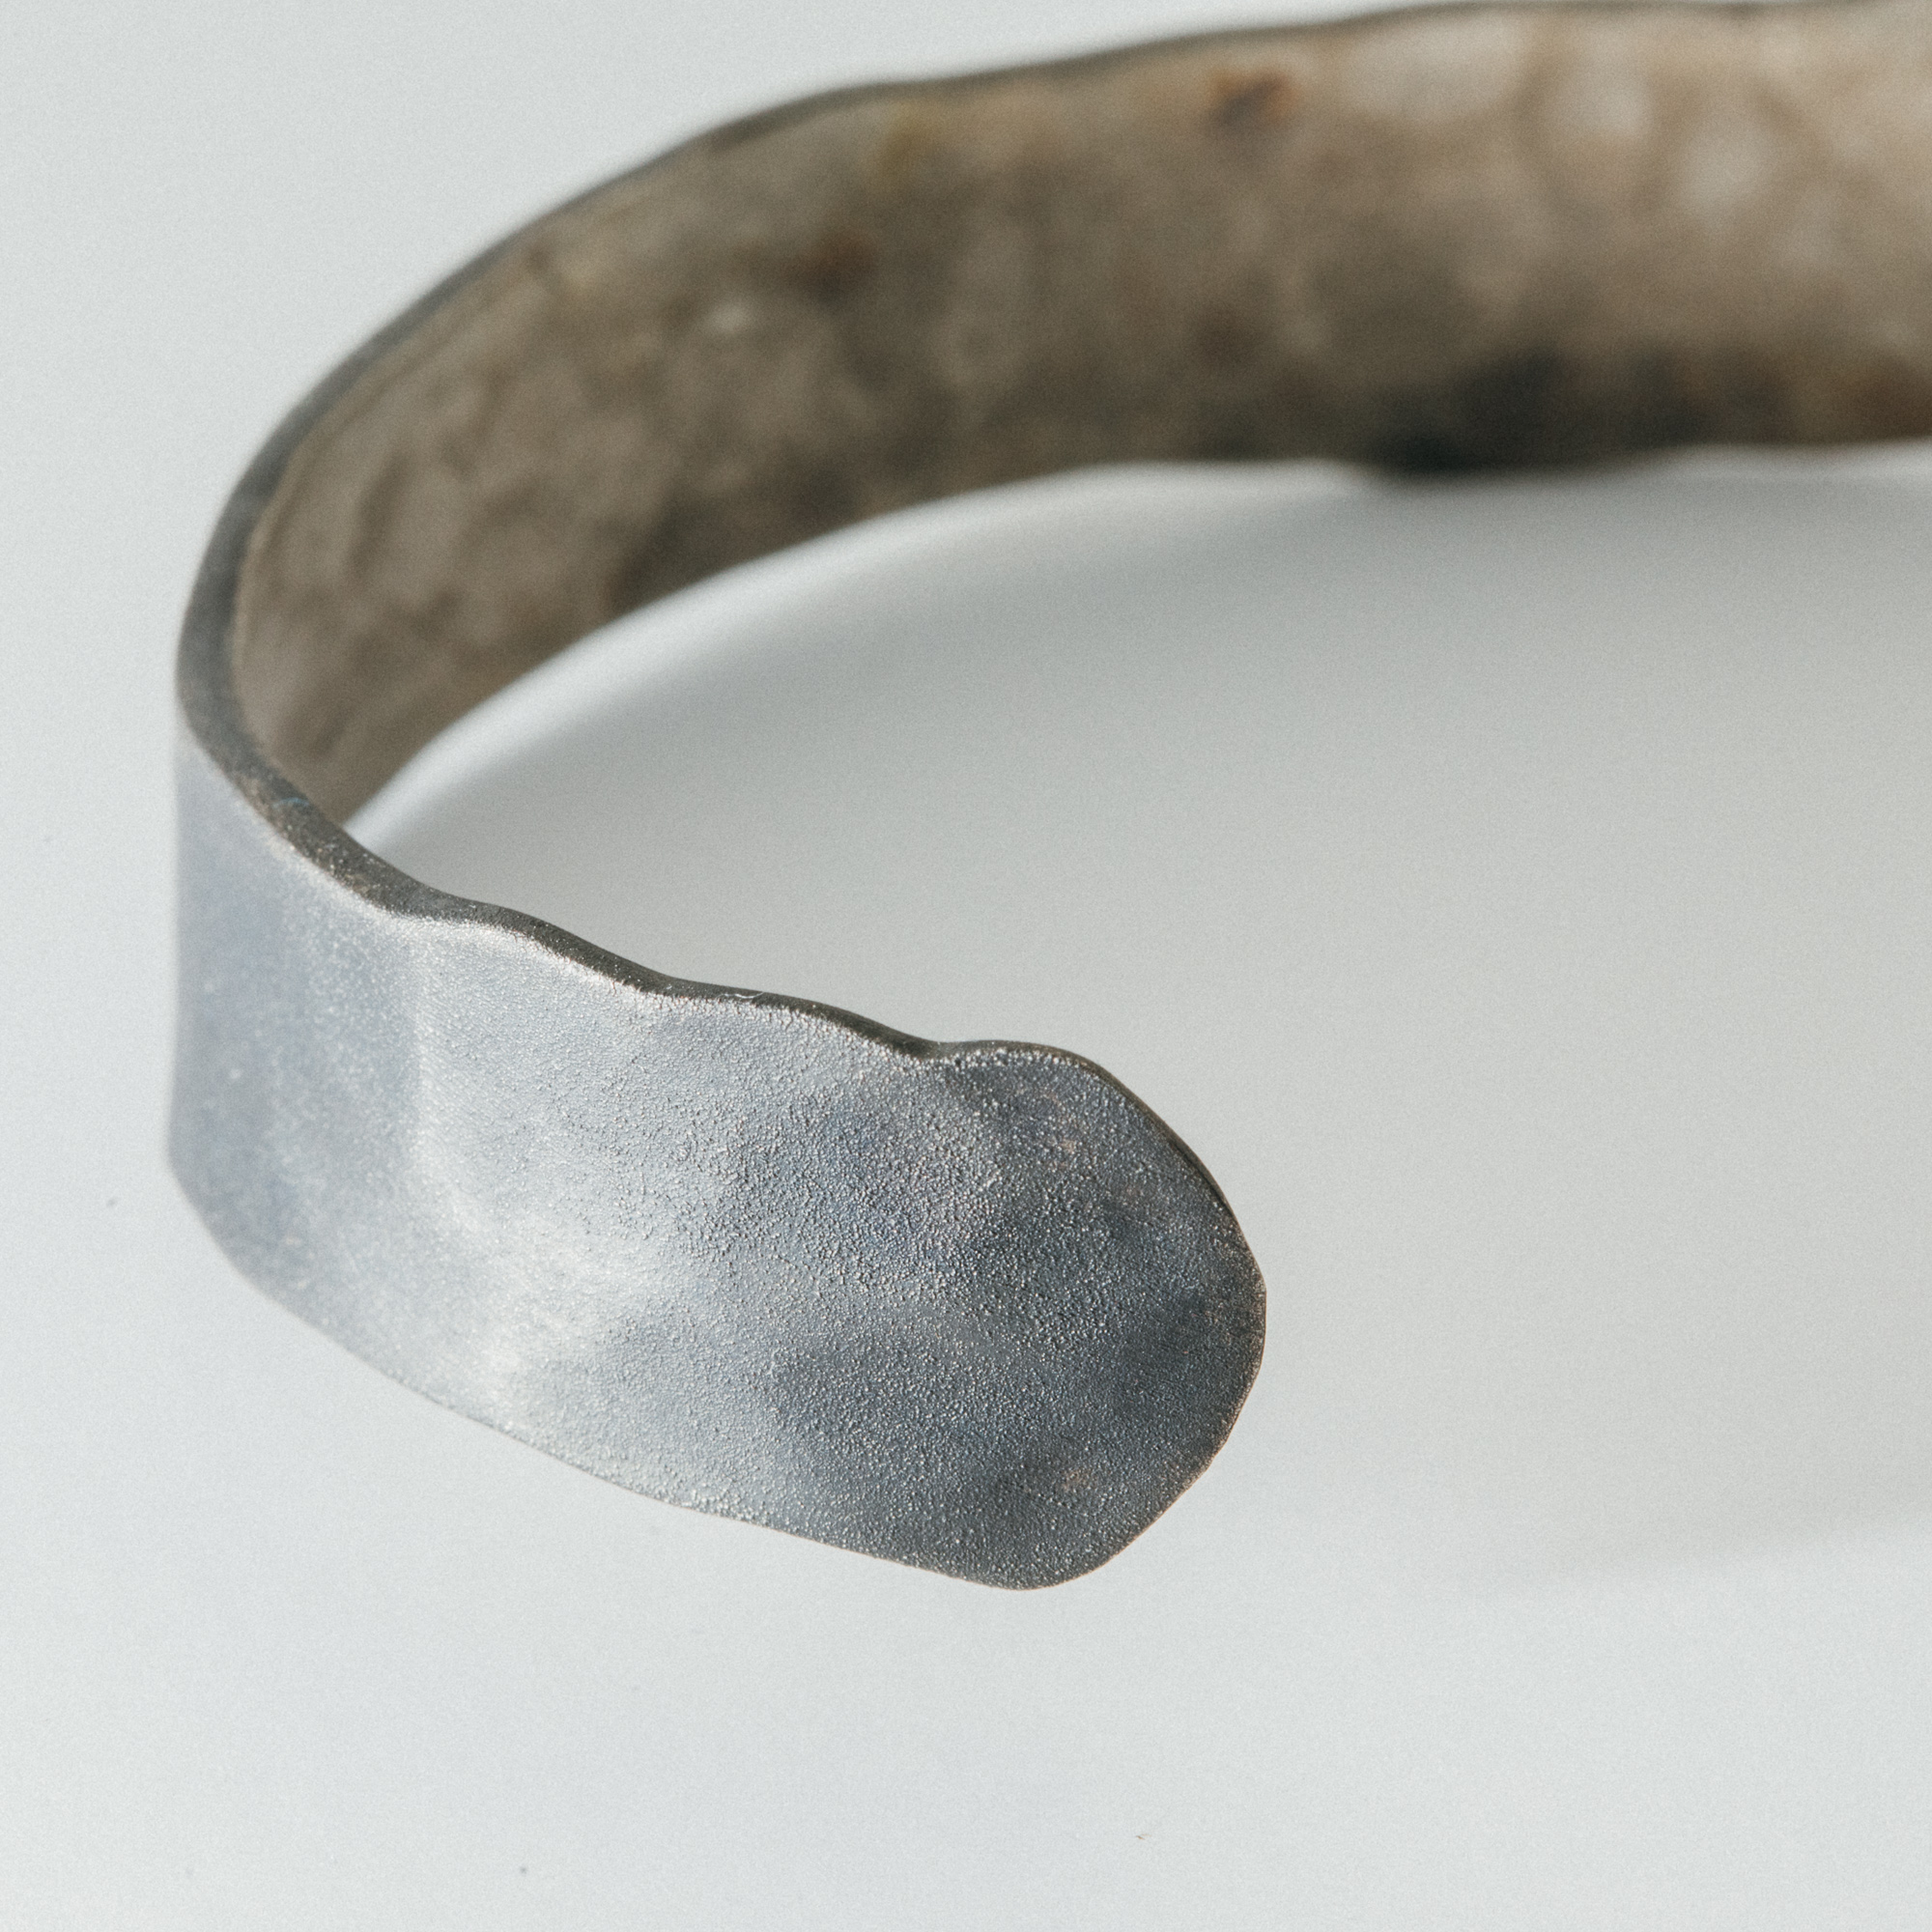 Hammered Sterling Silver Handmade Cuff Bracelet, Minimalist Simple Shiny  Silver 1/4 inch Wide, 6 1/2 long, Thick and Solid, Gift for Her